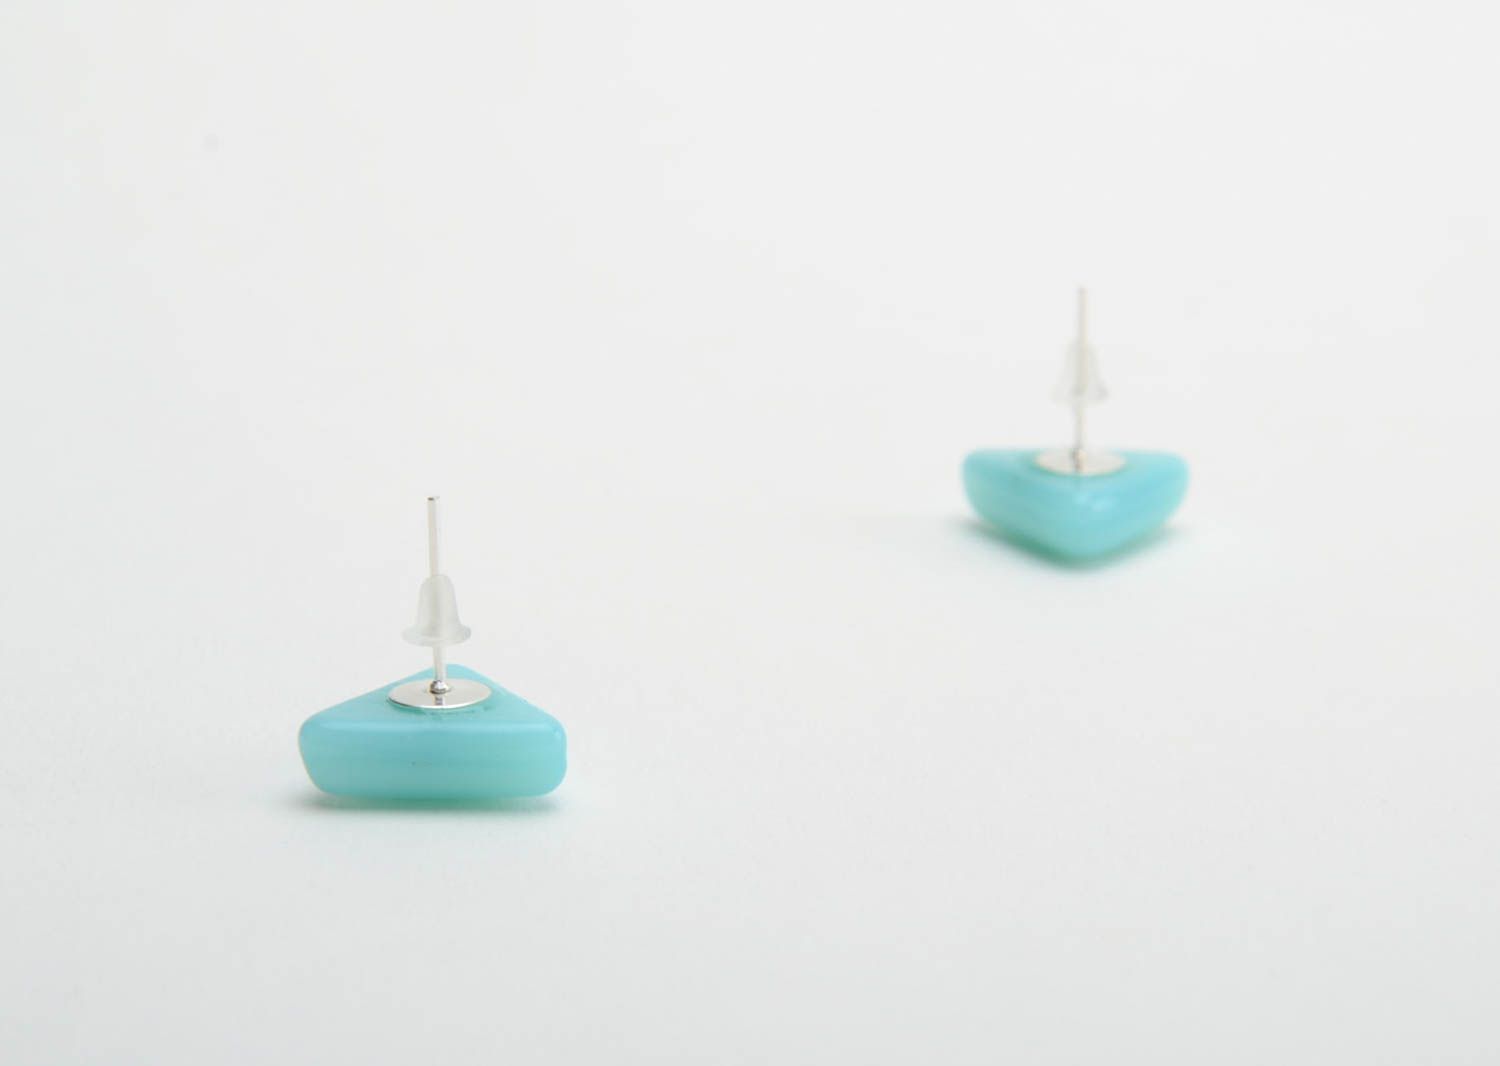 Turquoise color earrings small fusing glass triangular studs handmade accessory photo 4